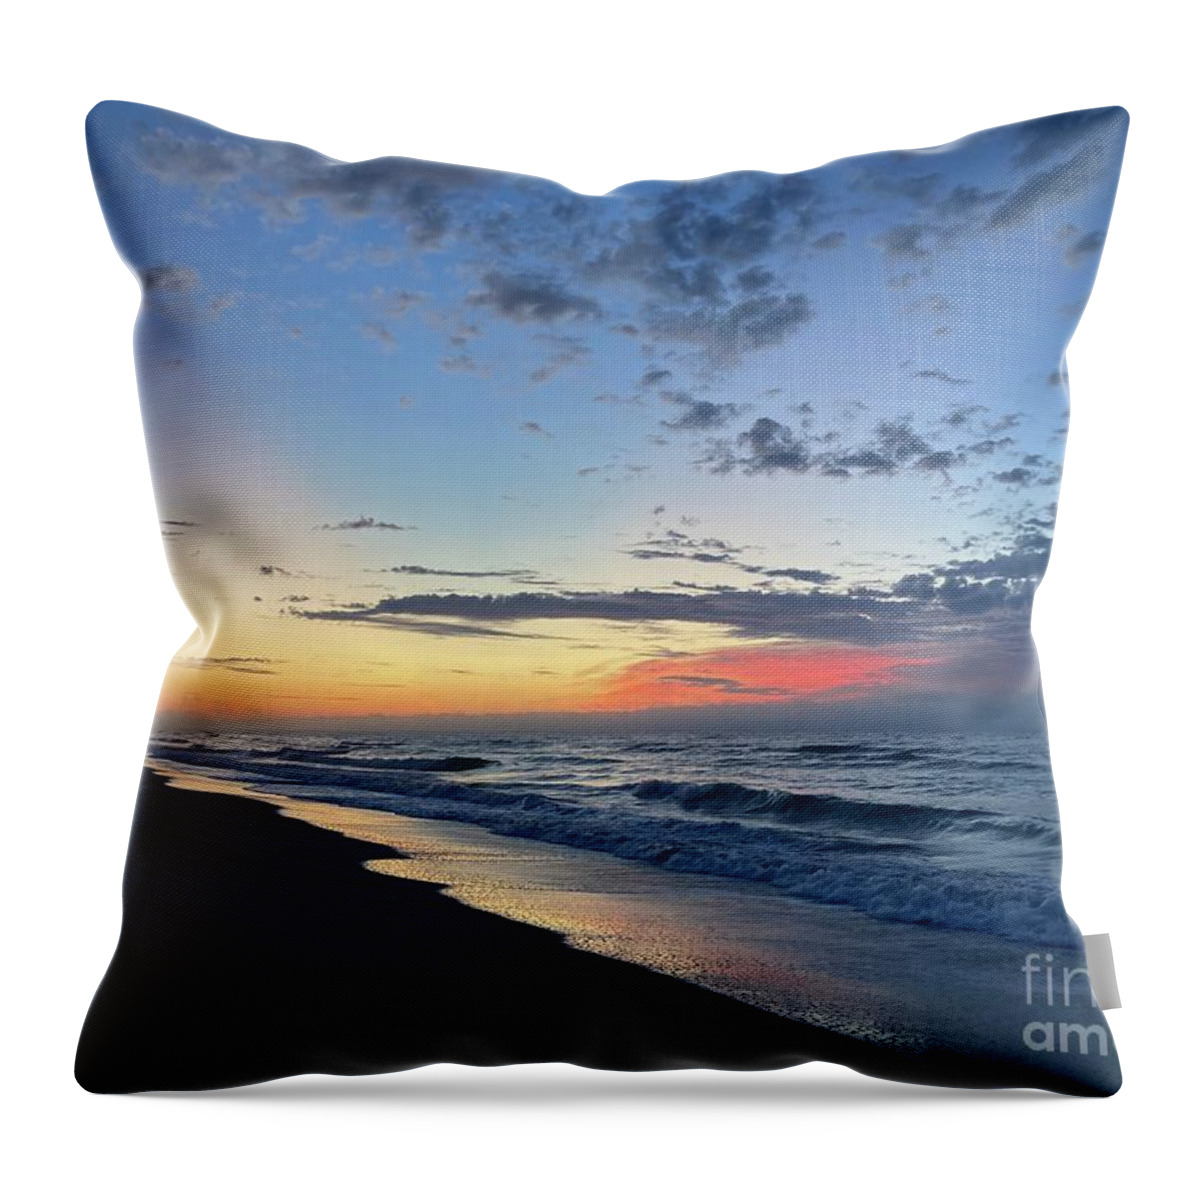  Throw Pillow featuring the photograph Beach7 by Mary Kobet